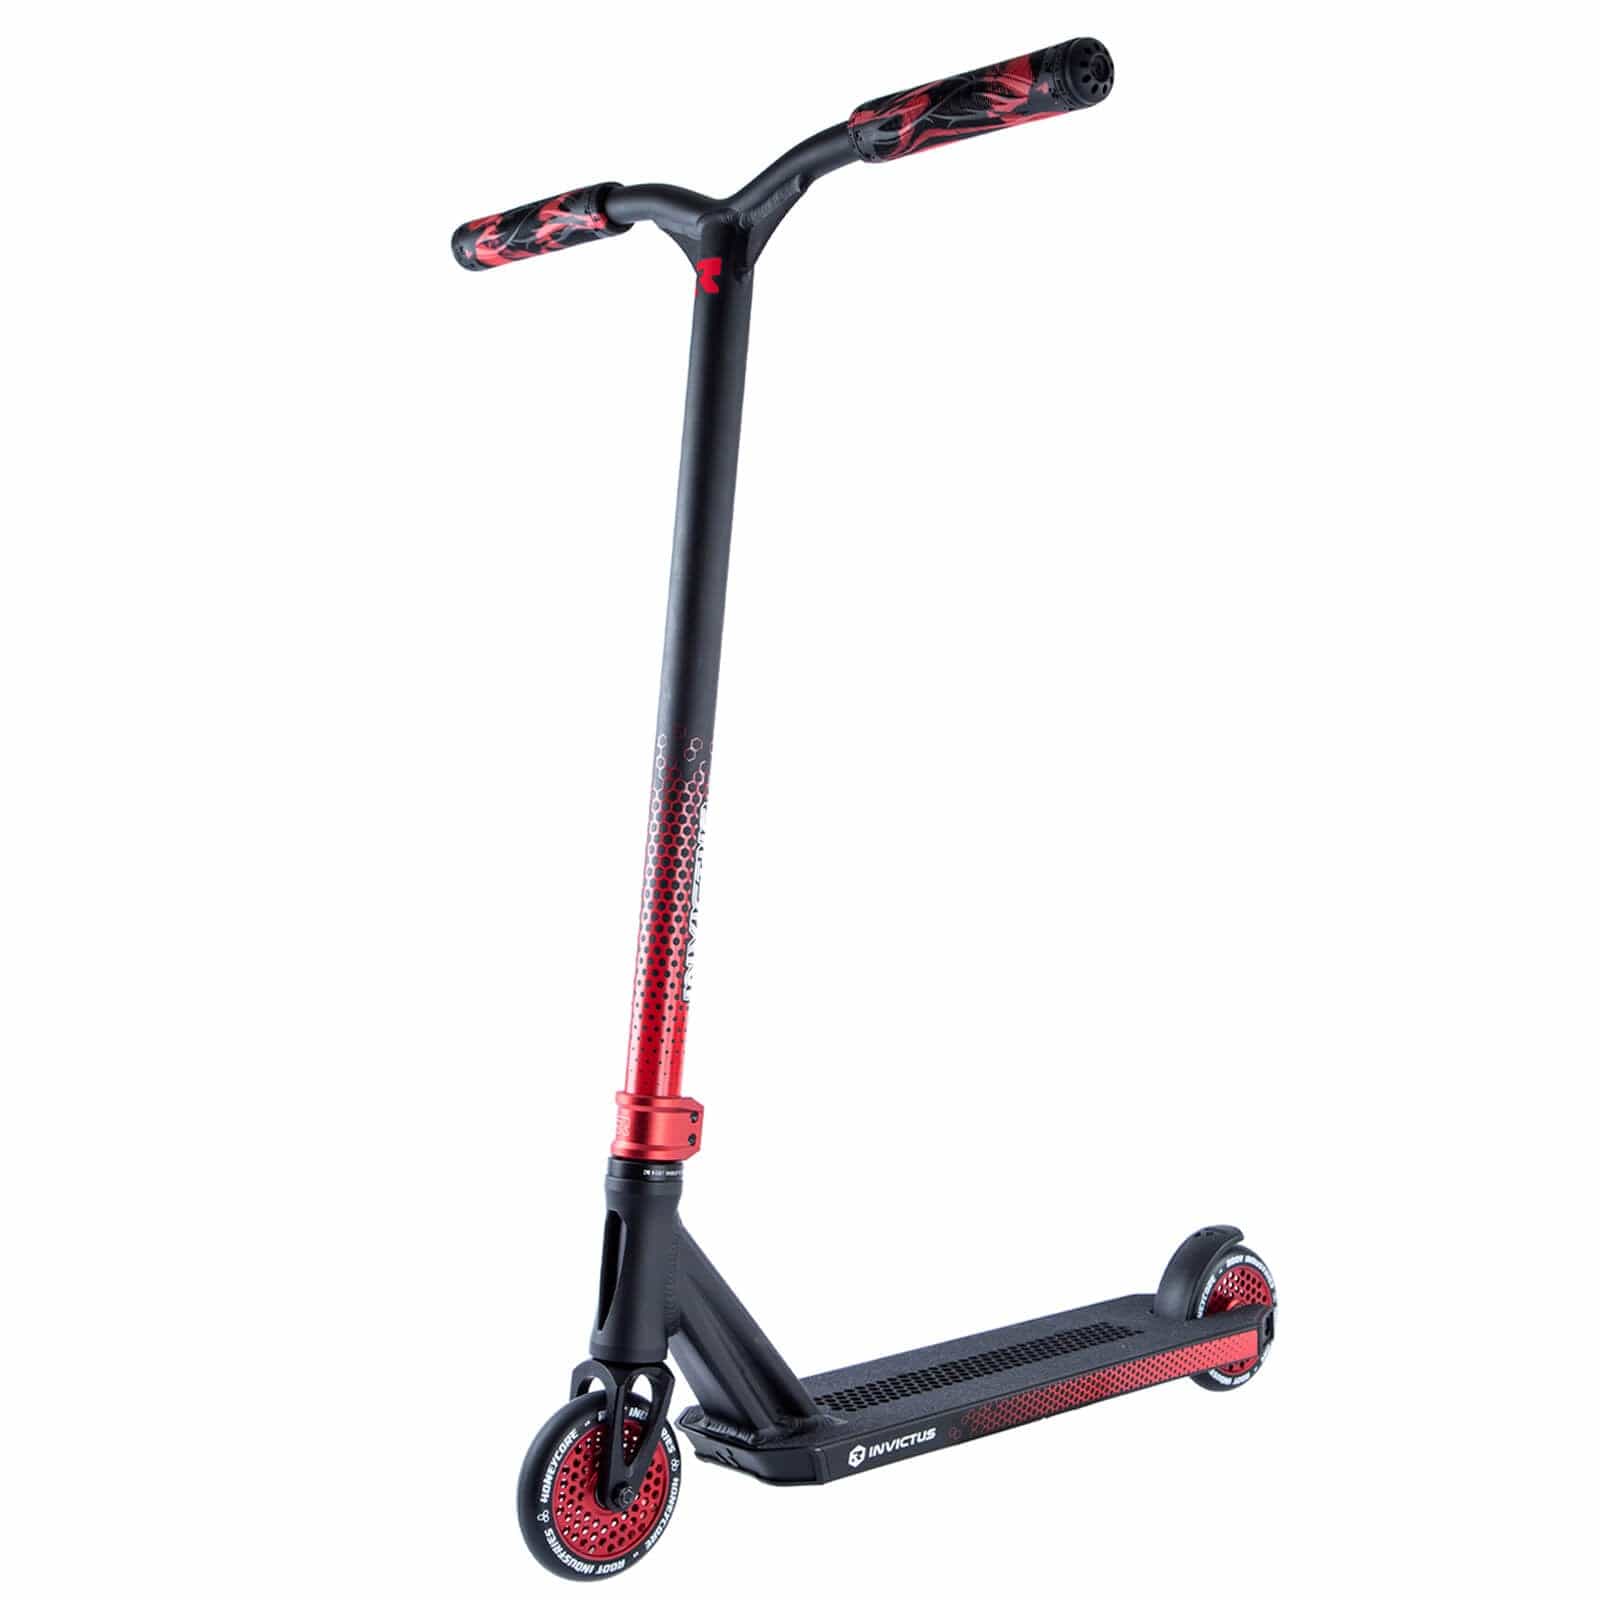 Root Industries Invictus 2 Complete |COMPLETE SCOOTERS |$169.99 |TSP The Shop | Root Industries Invictus 2 | PROSCOOTERLAB